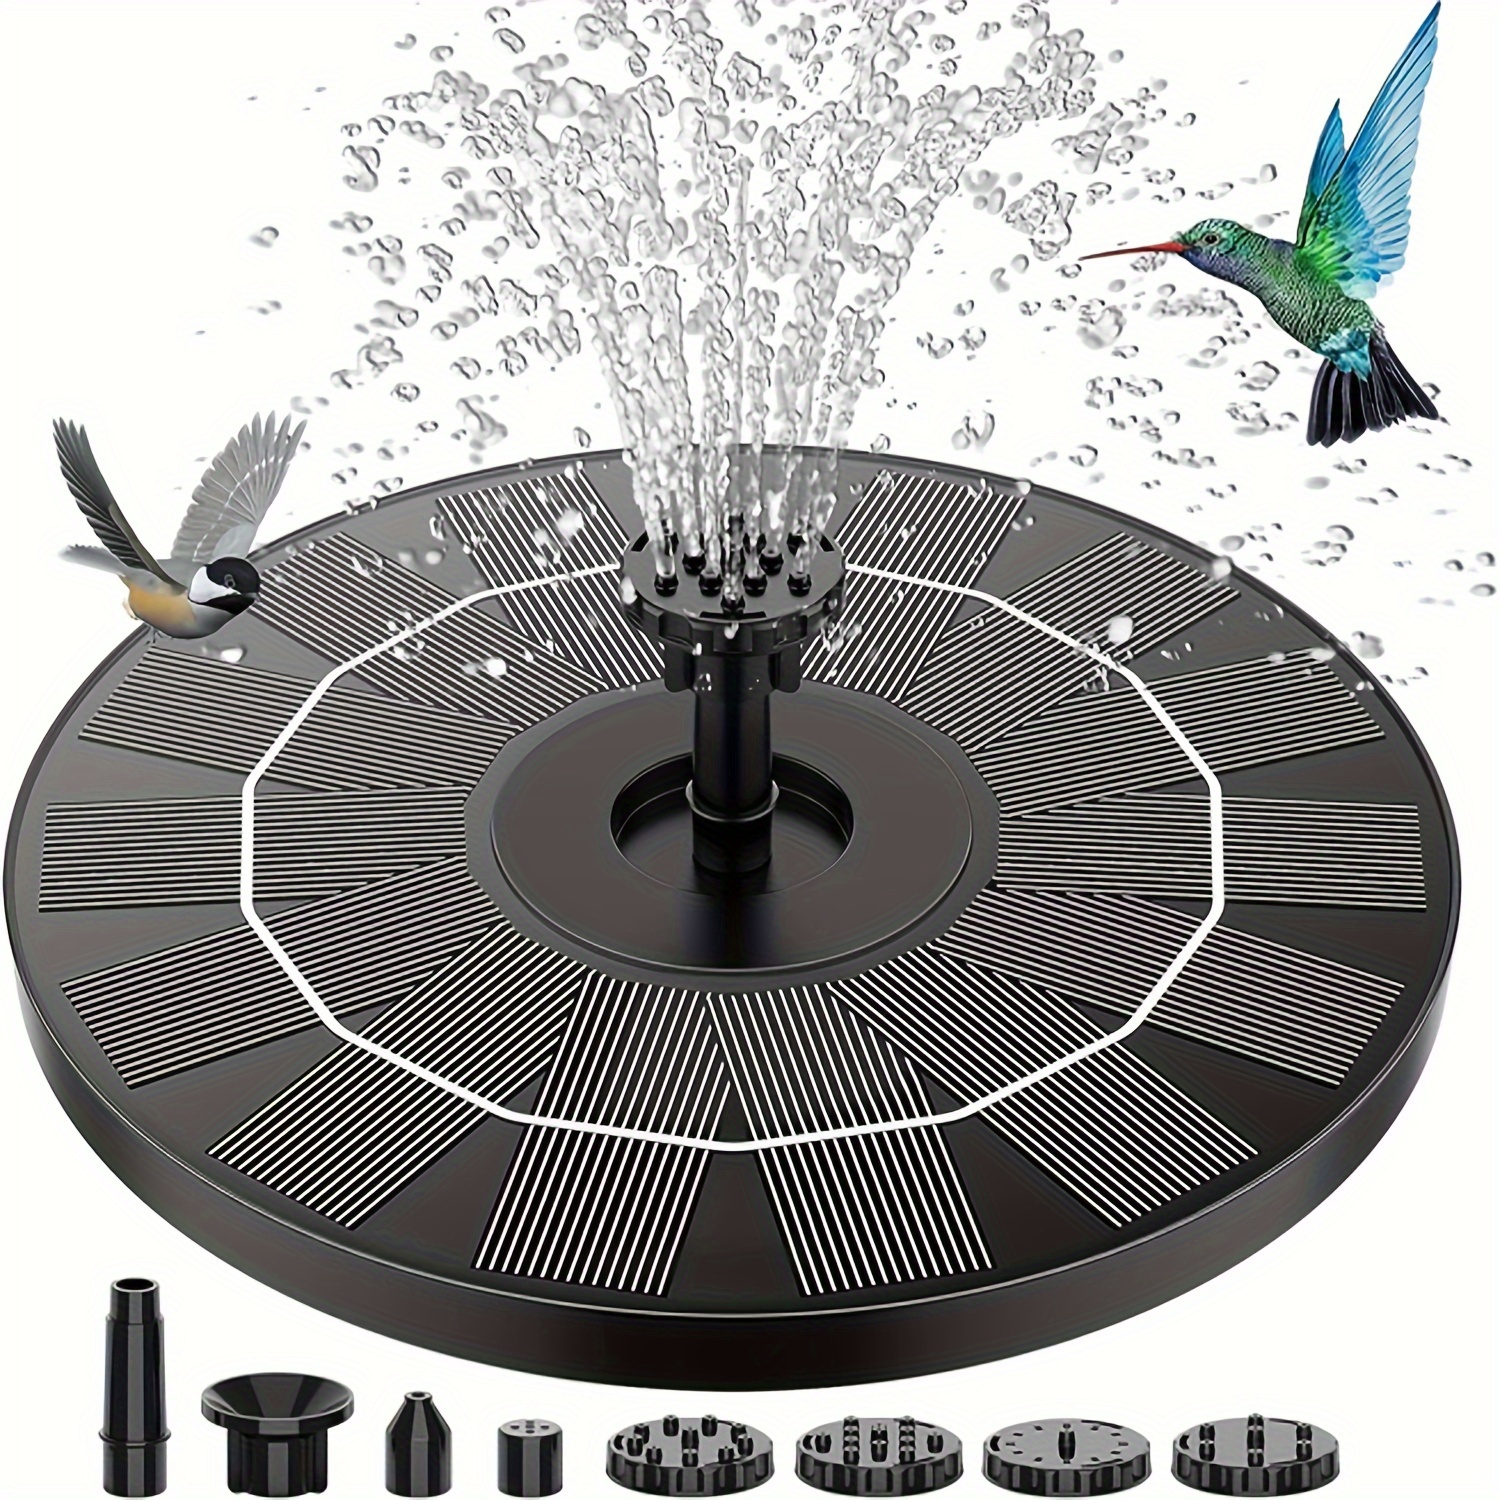 

1 Pc 3.5w Solar Fountain, Solar Fountain With 6 Nozzles, Solar Fountain, Suitable For Bird Baths, Garden Decorations, Swimming Pools, Ponds, Fish Tanks And Aquariums, Upgraded 7.1-inch Solar Panels